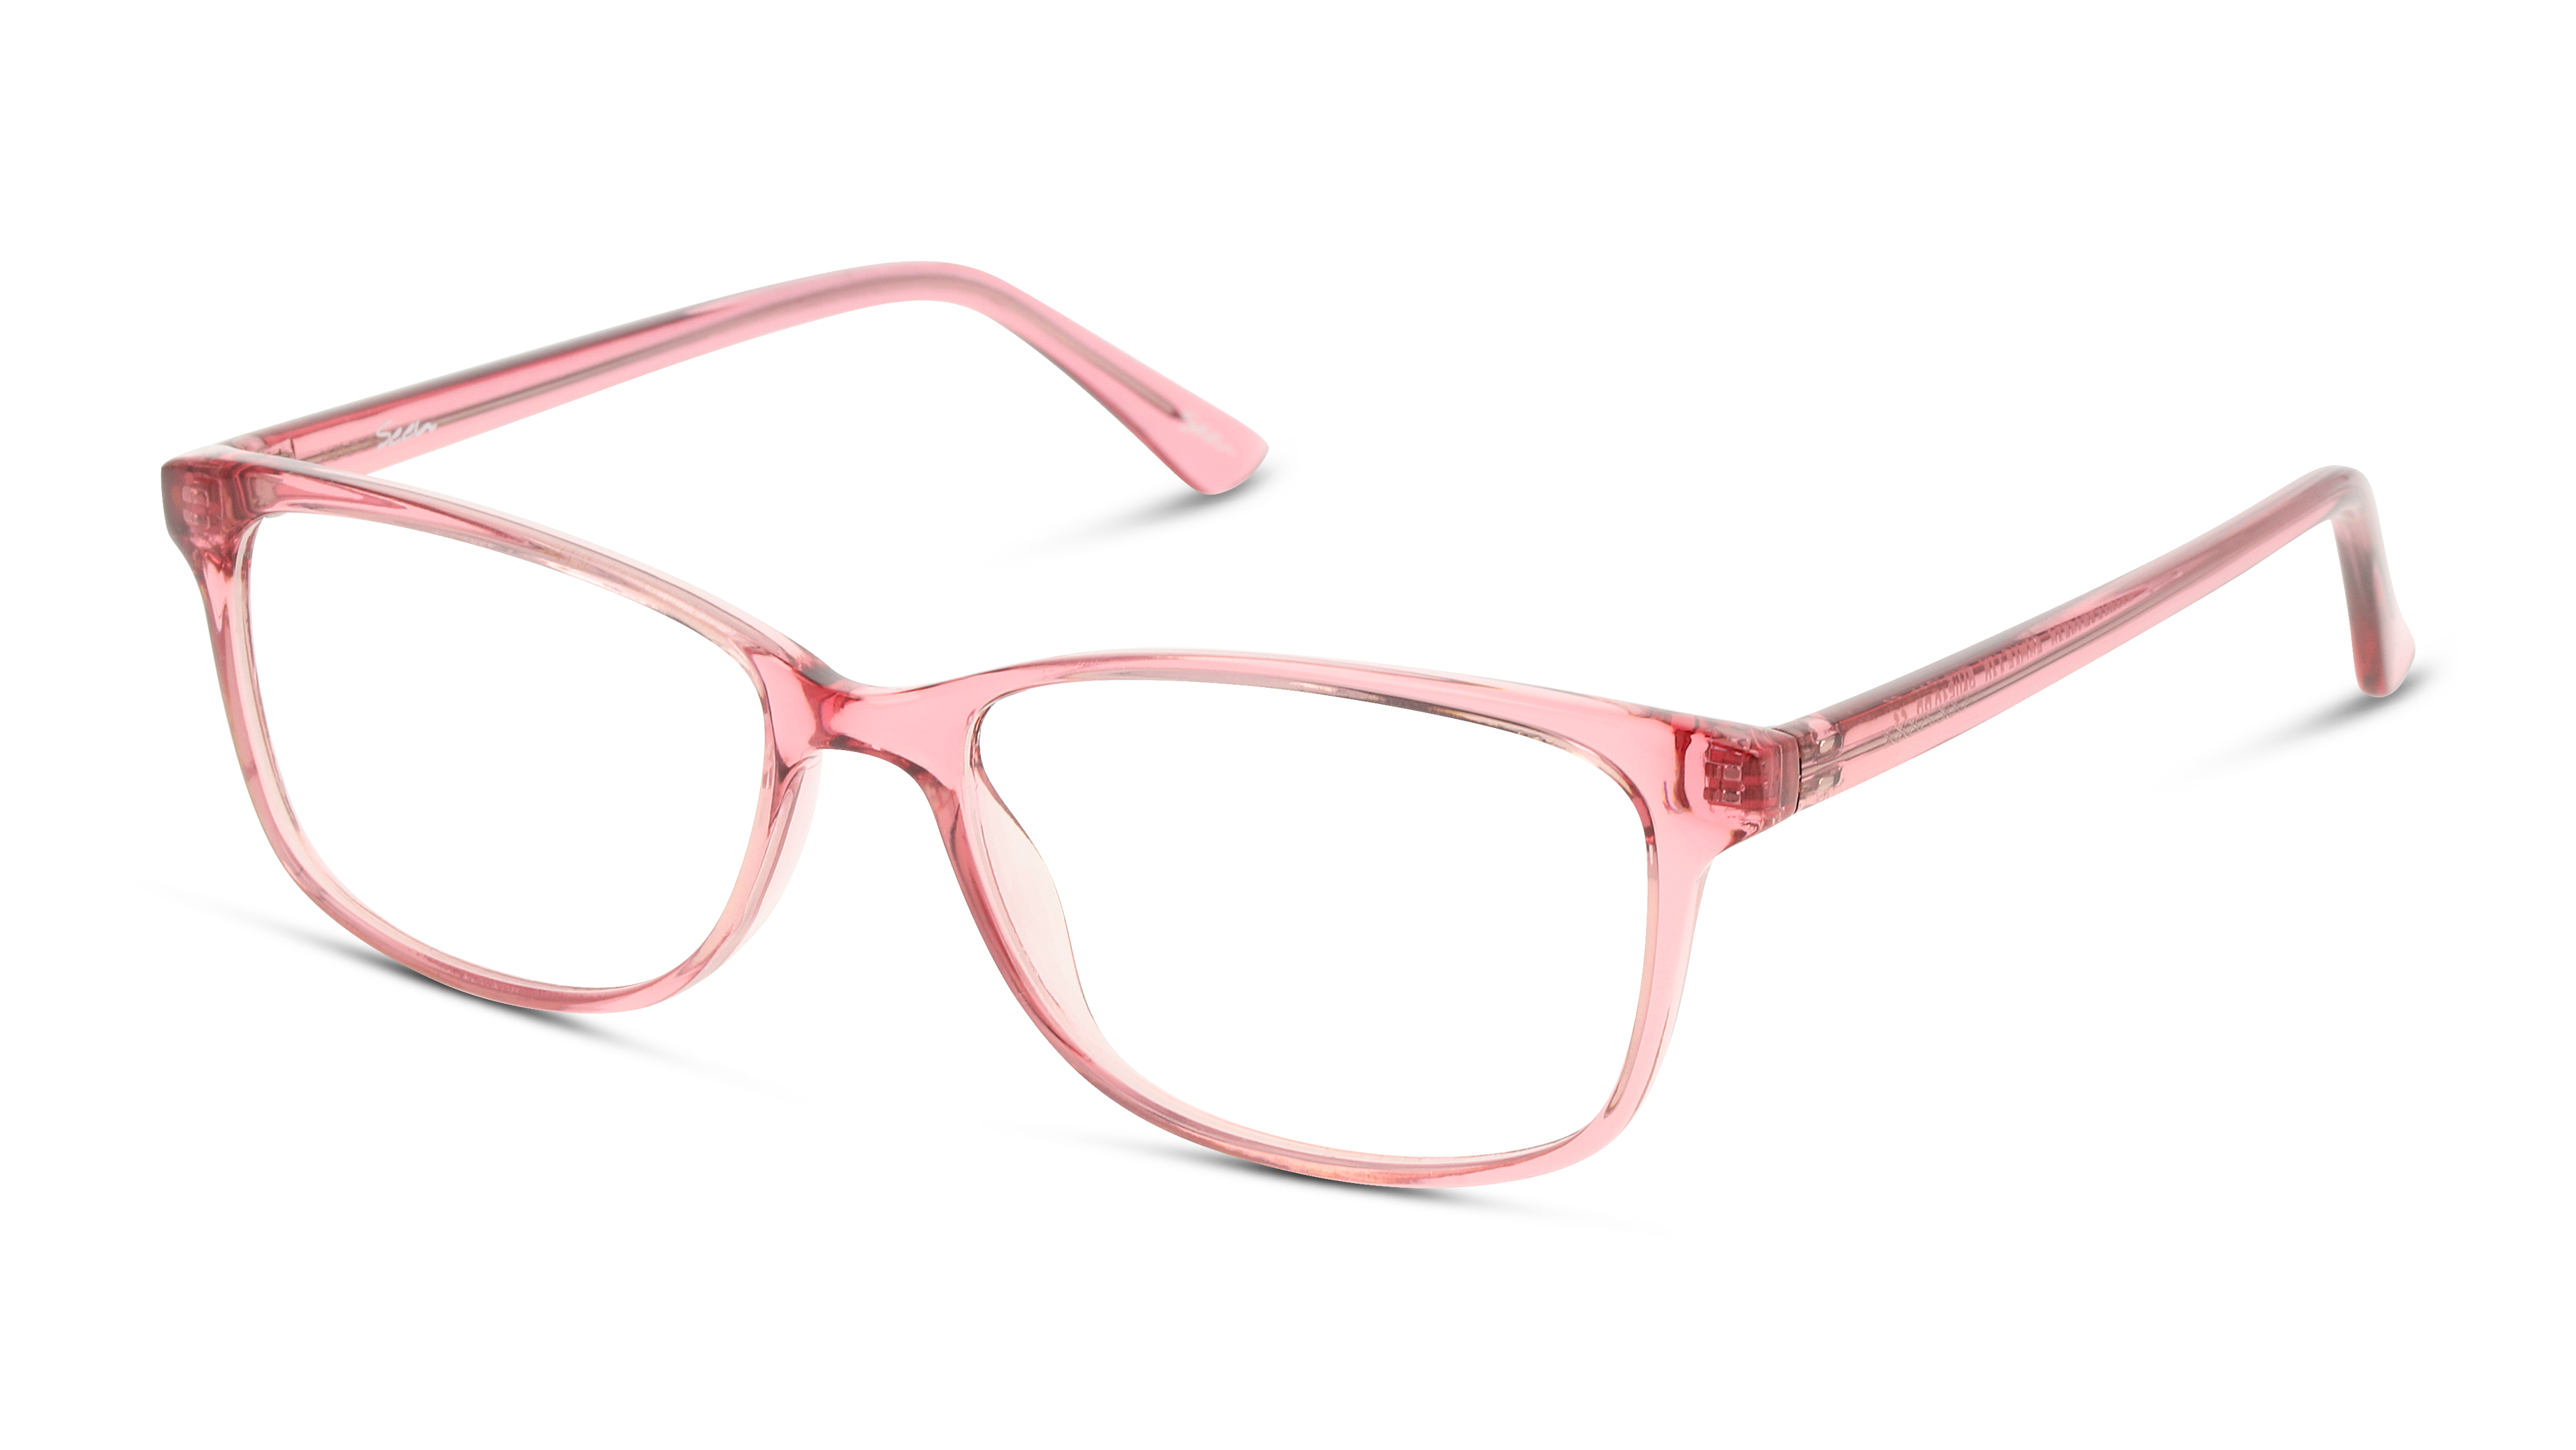 Angle_Left01 Seen SN IF10 Youth Glasses Transparent / Pink